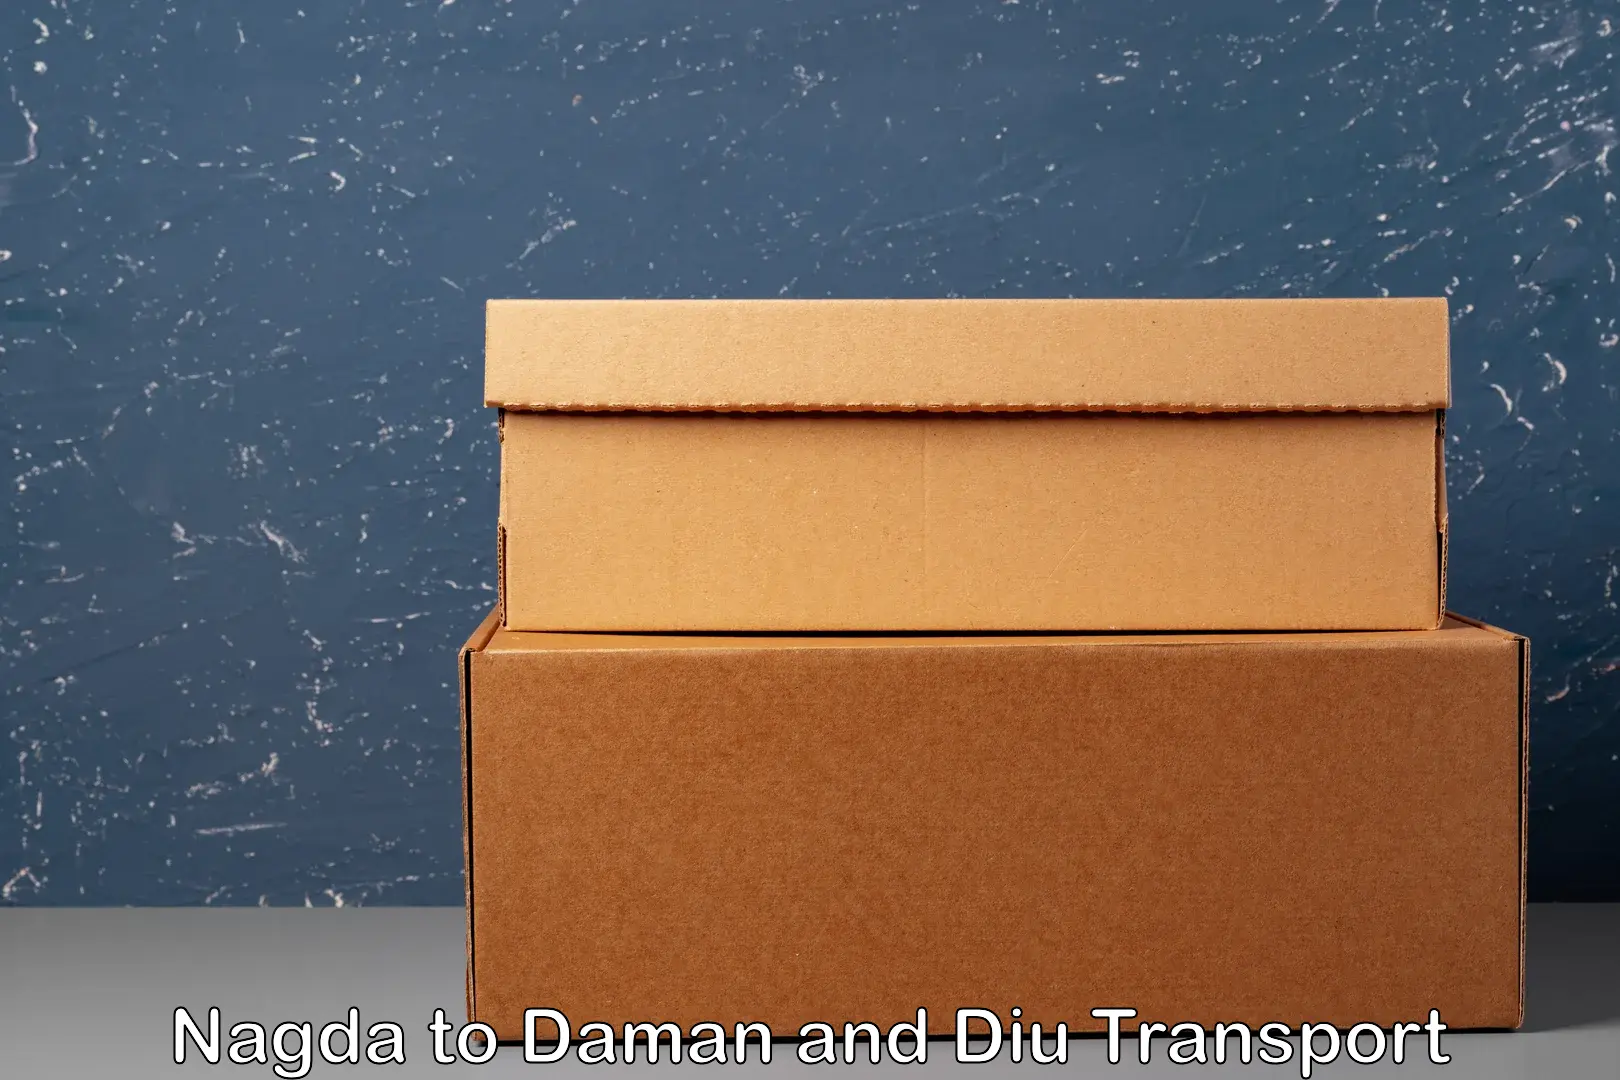 Transport services in Nagda to Daman and Diu